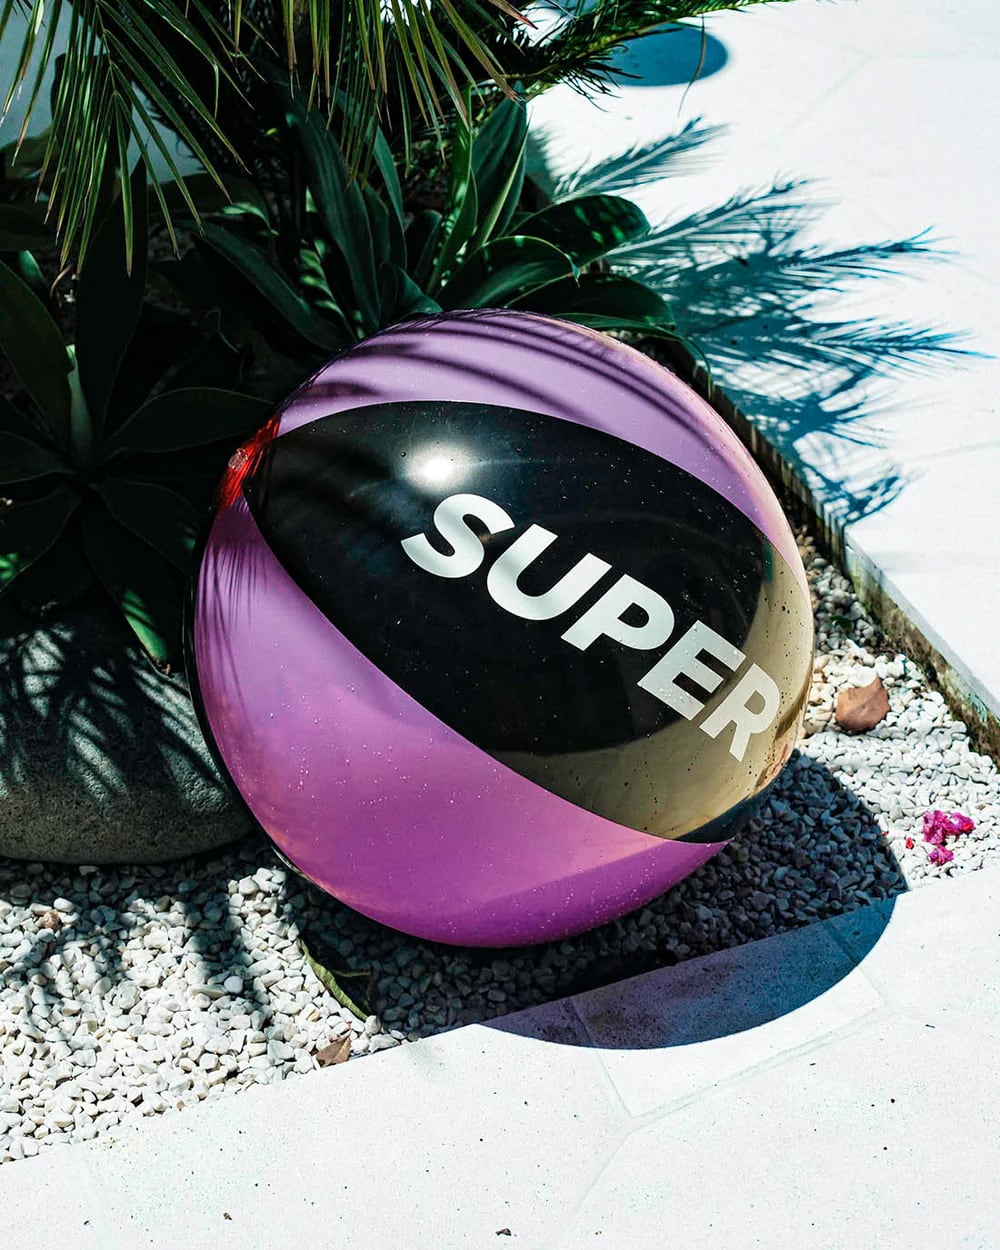 Beach ball with solid black and pink design.